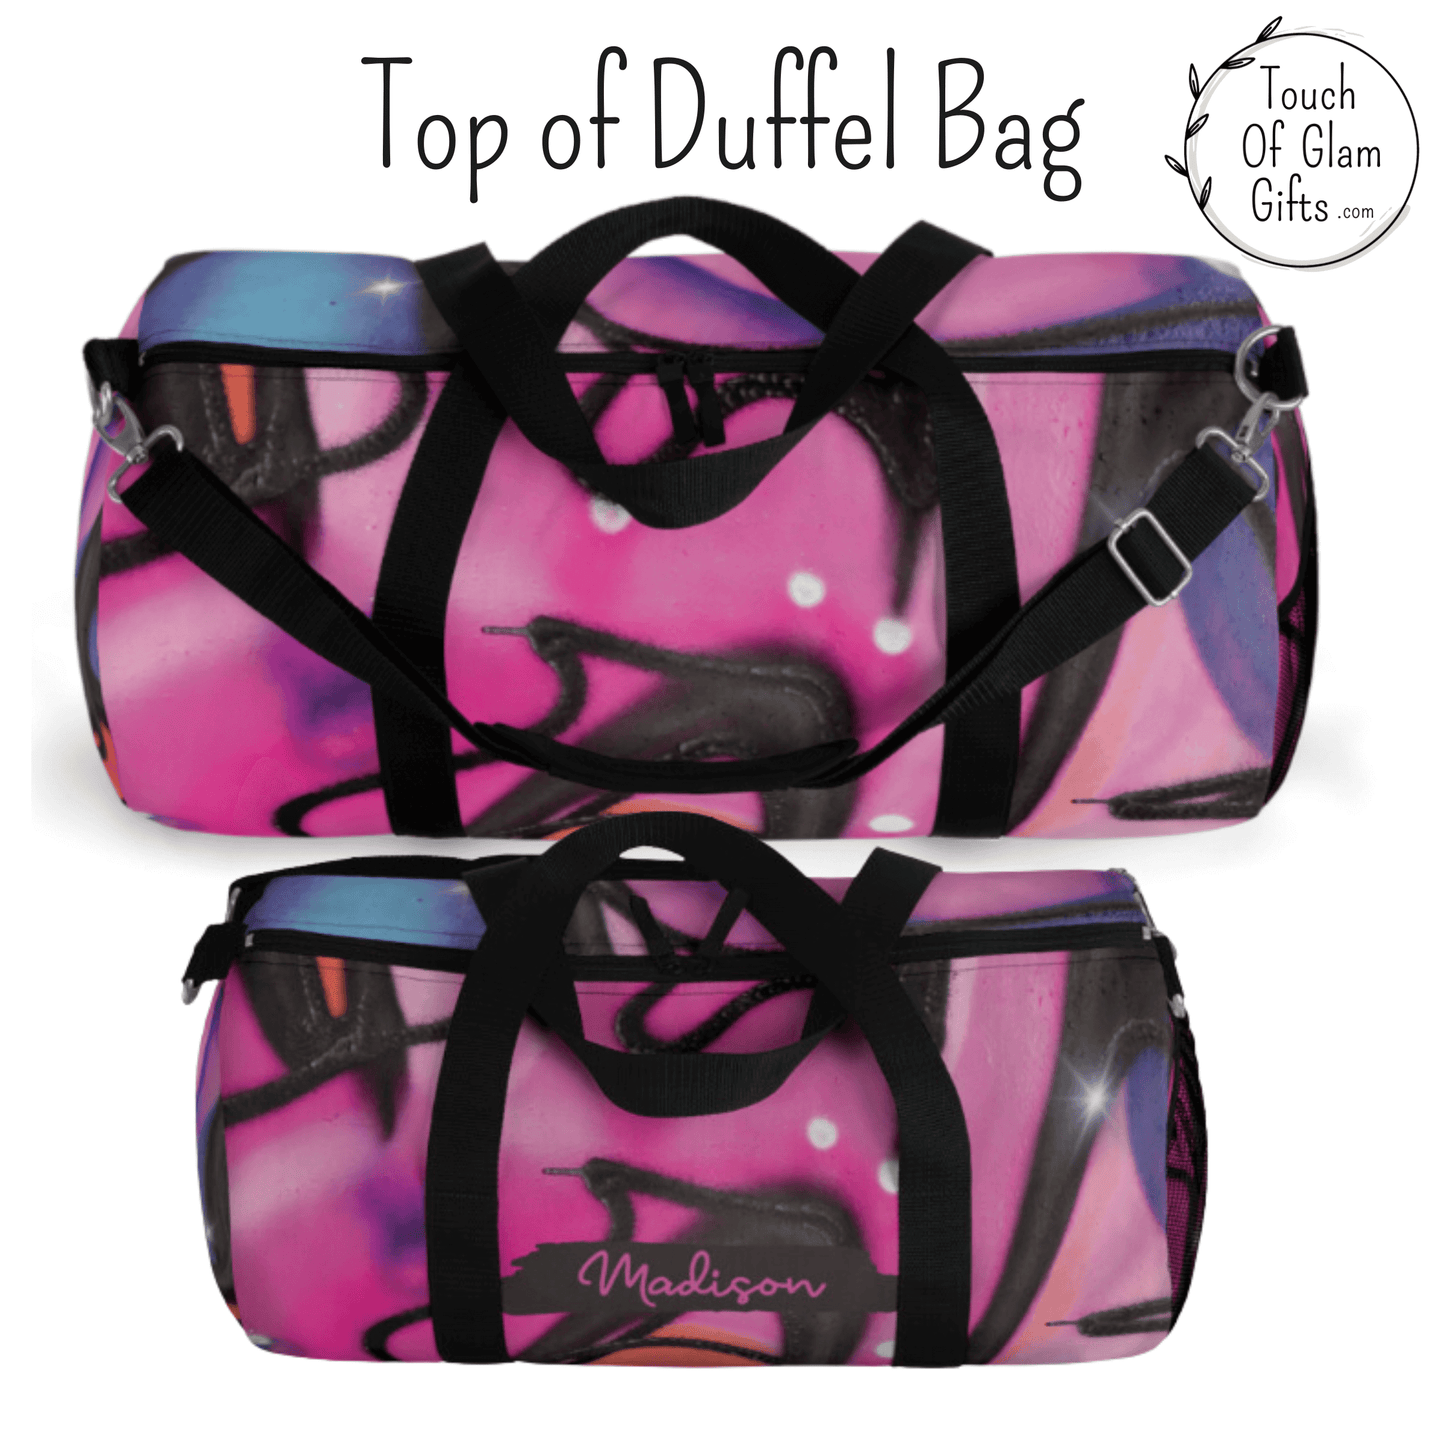 The top of our pink retro duffel bag shows a quality zipper with two zipper heads for easy packing for the weekend. This is the perfect gift for teen girls and teenagers because you can add your name or enjoy the bag plain with no monogram.